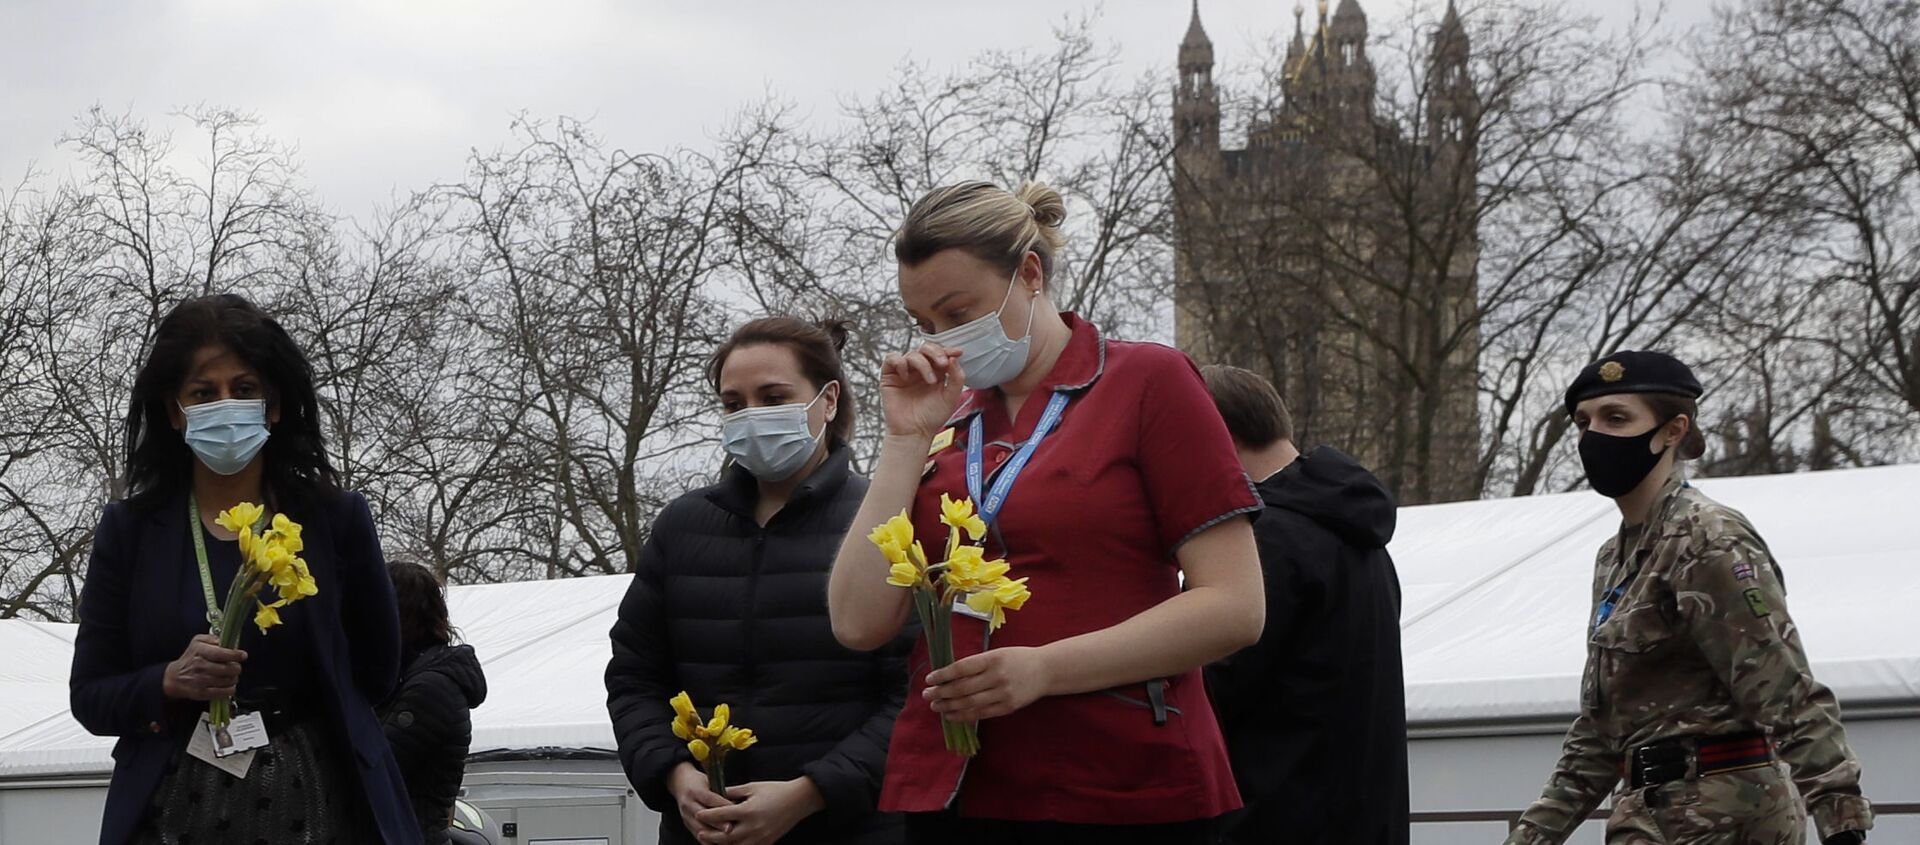 Members of NHS staff lay flowers after a minute of silence and reflection at St Thomas' hospital in London, Tuesday, March 23, 2021 - Sputnik International, 1920